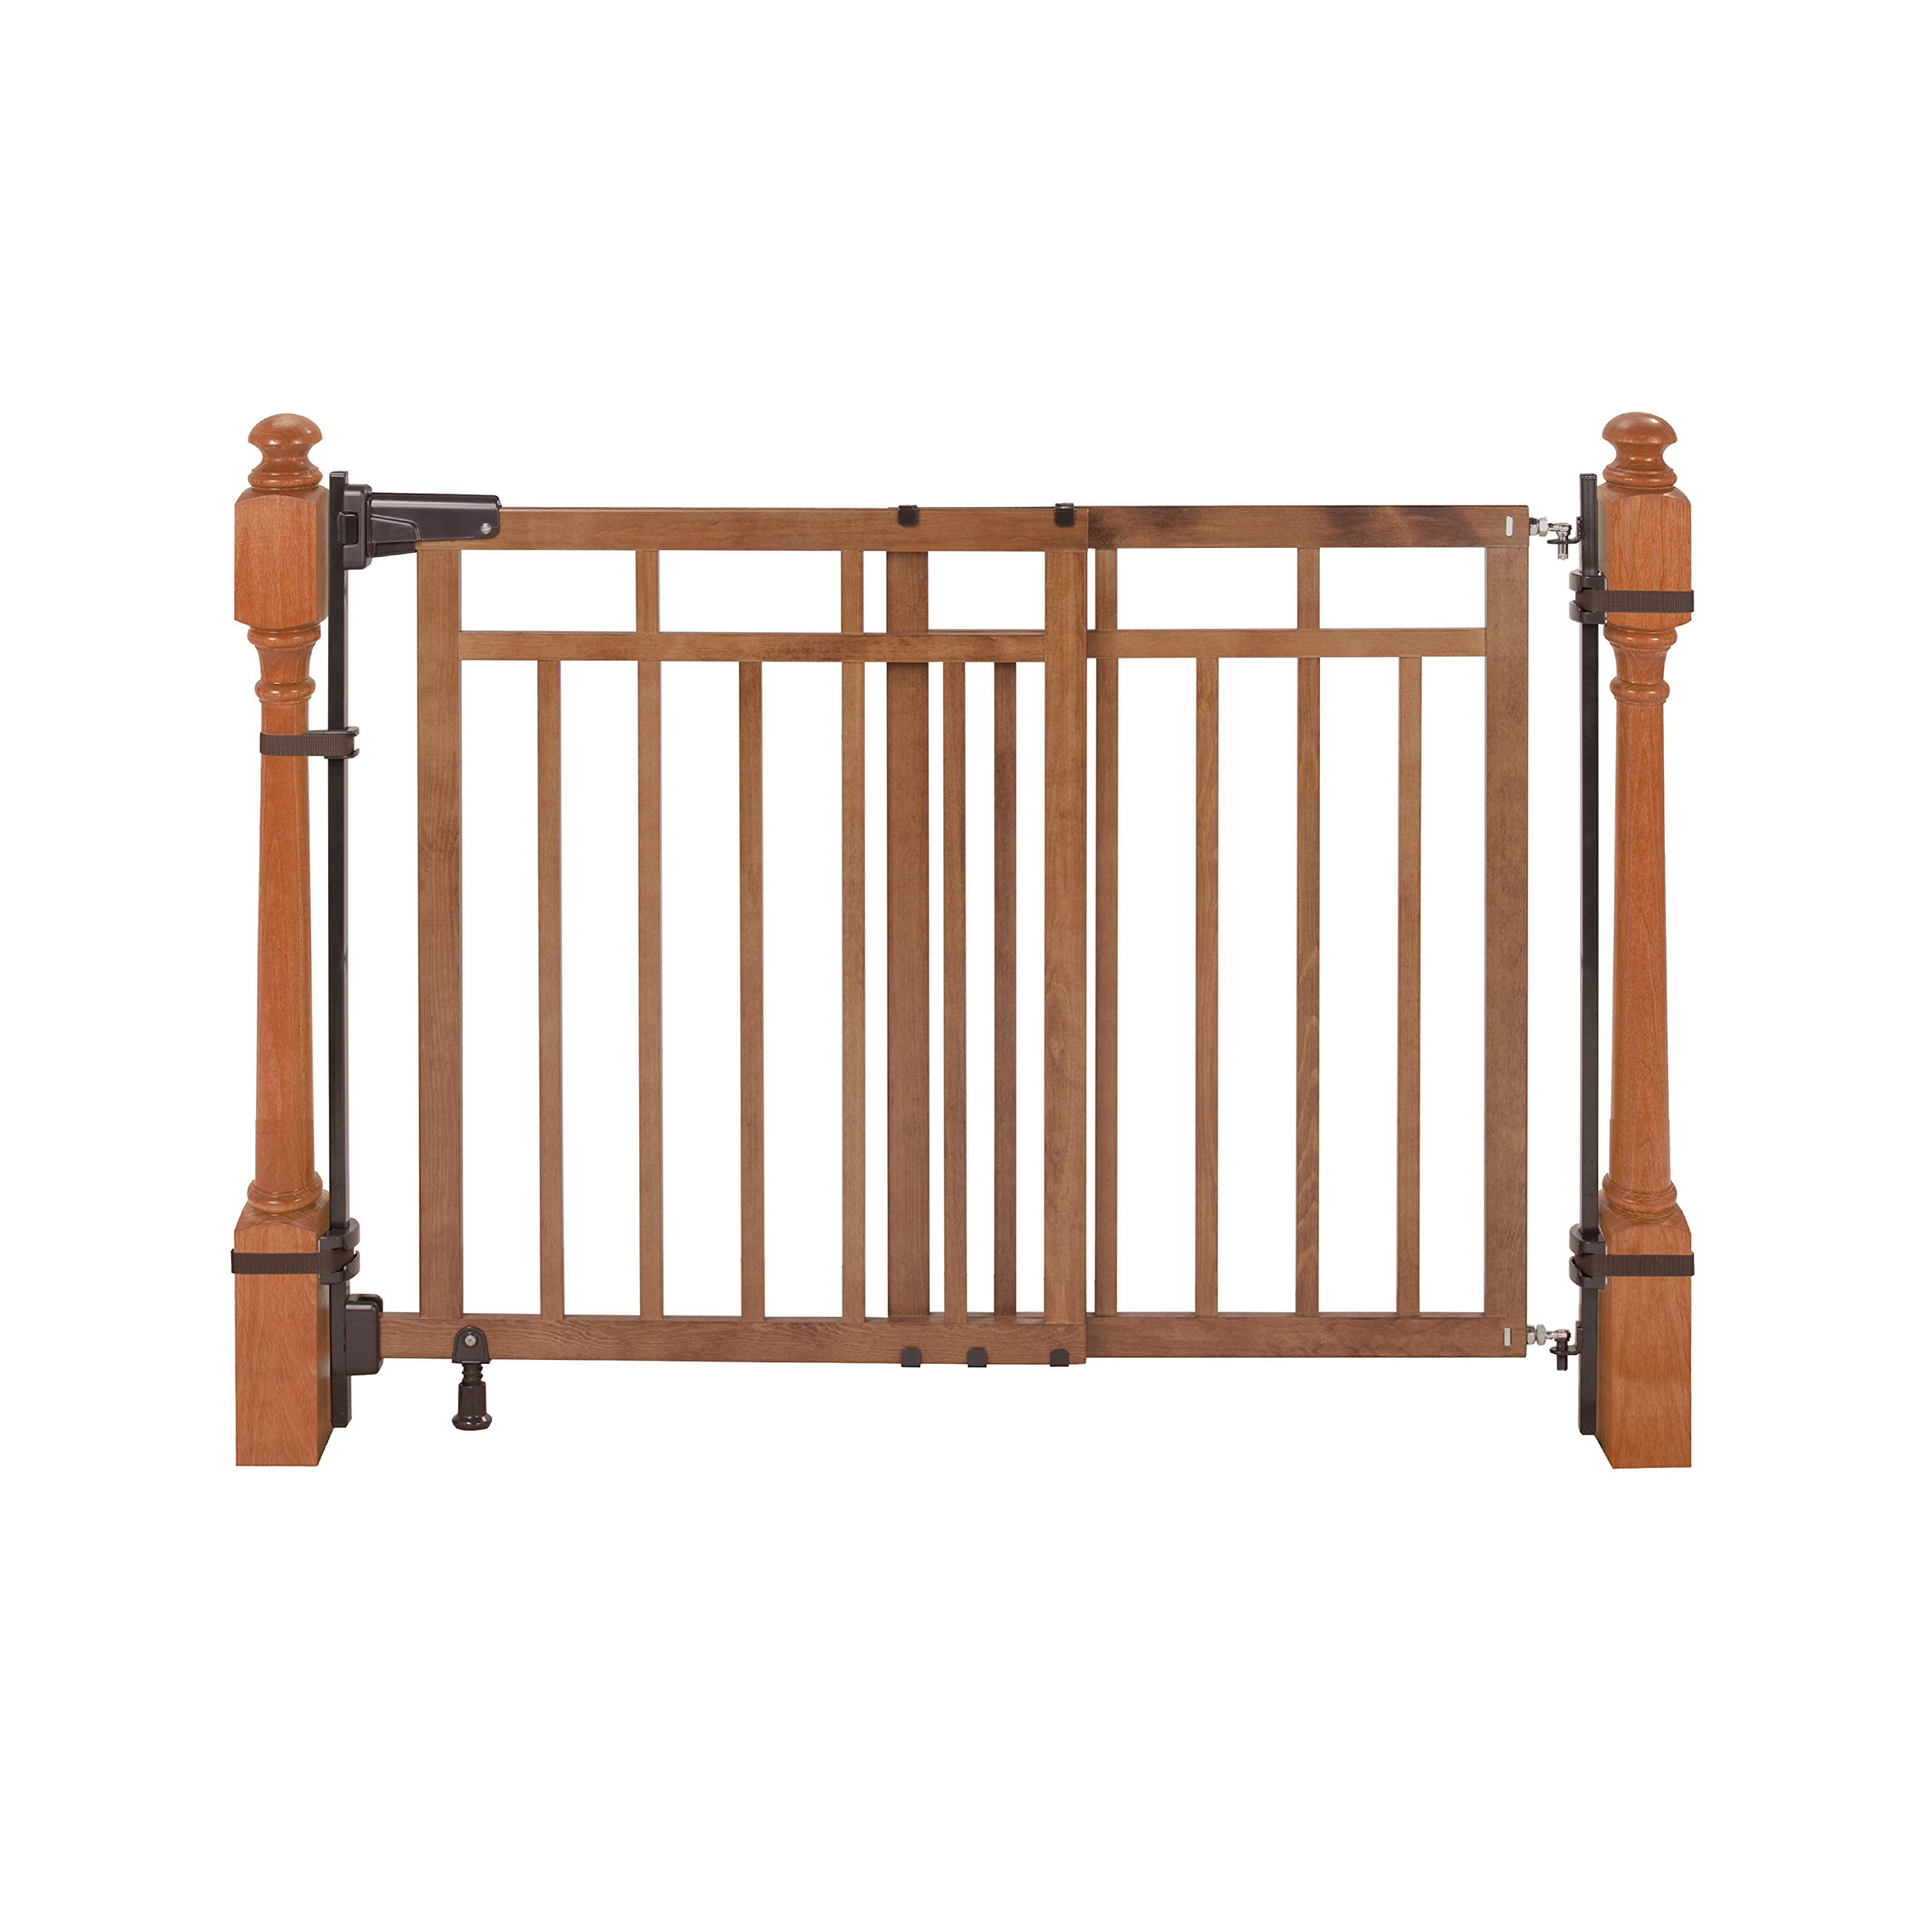 Summer Infant Wood Banister & Stair Safety Pet and Baby Gate, 32"-48" Wide, 33" Tall, Install Banister to Banister or Wall, or W